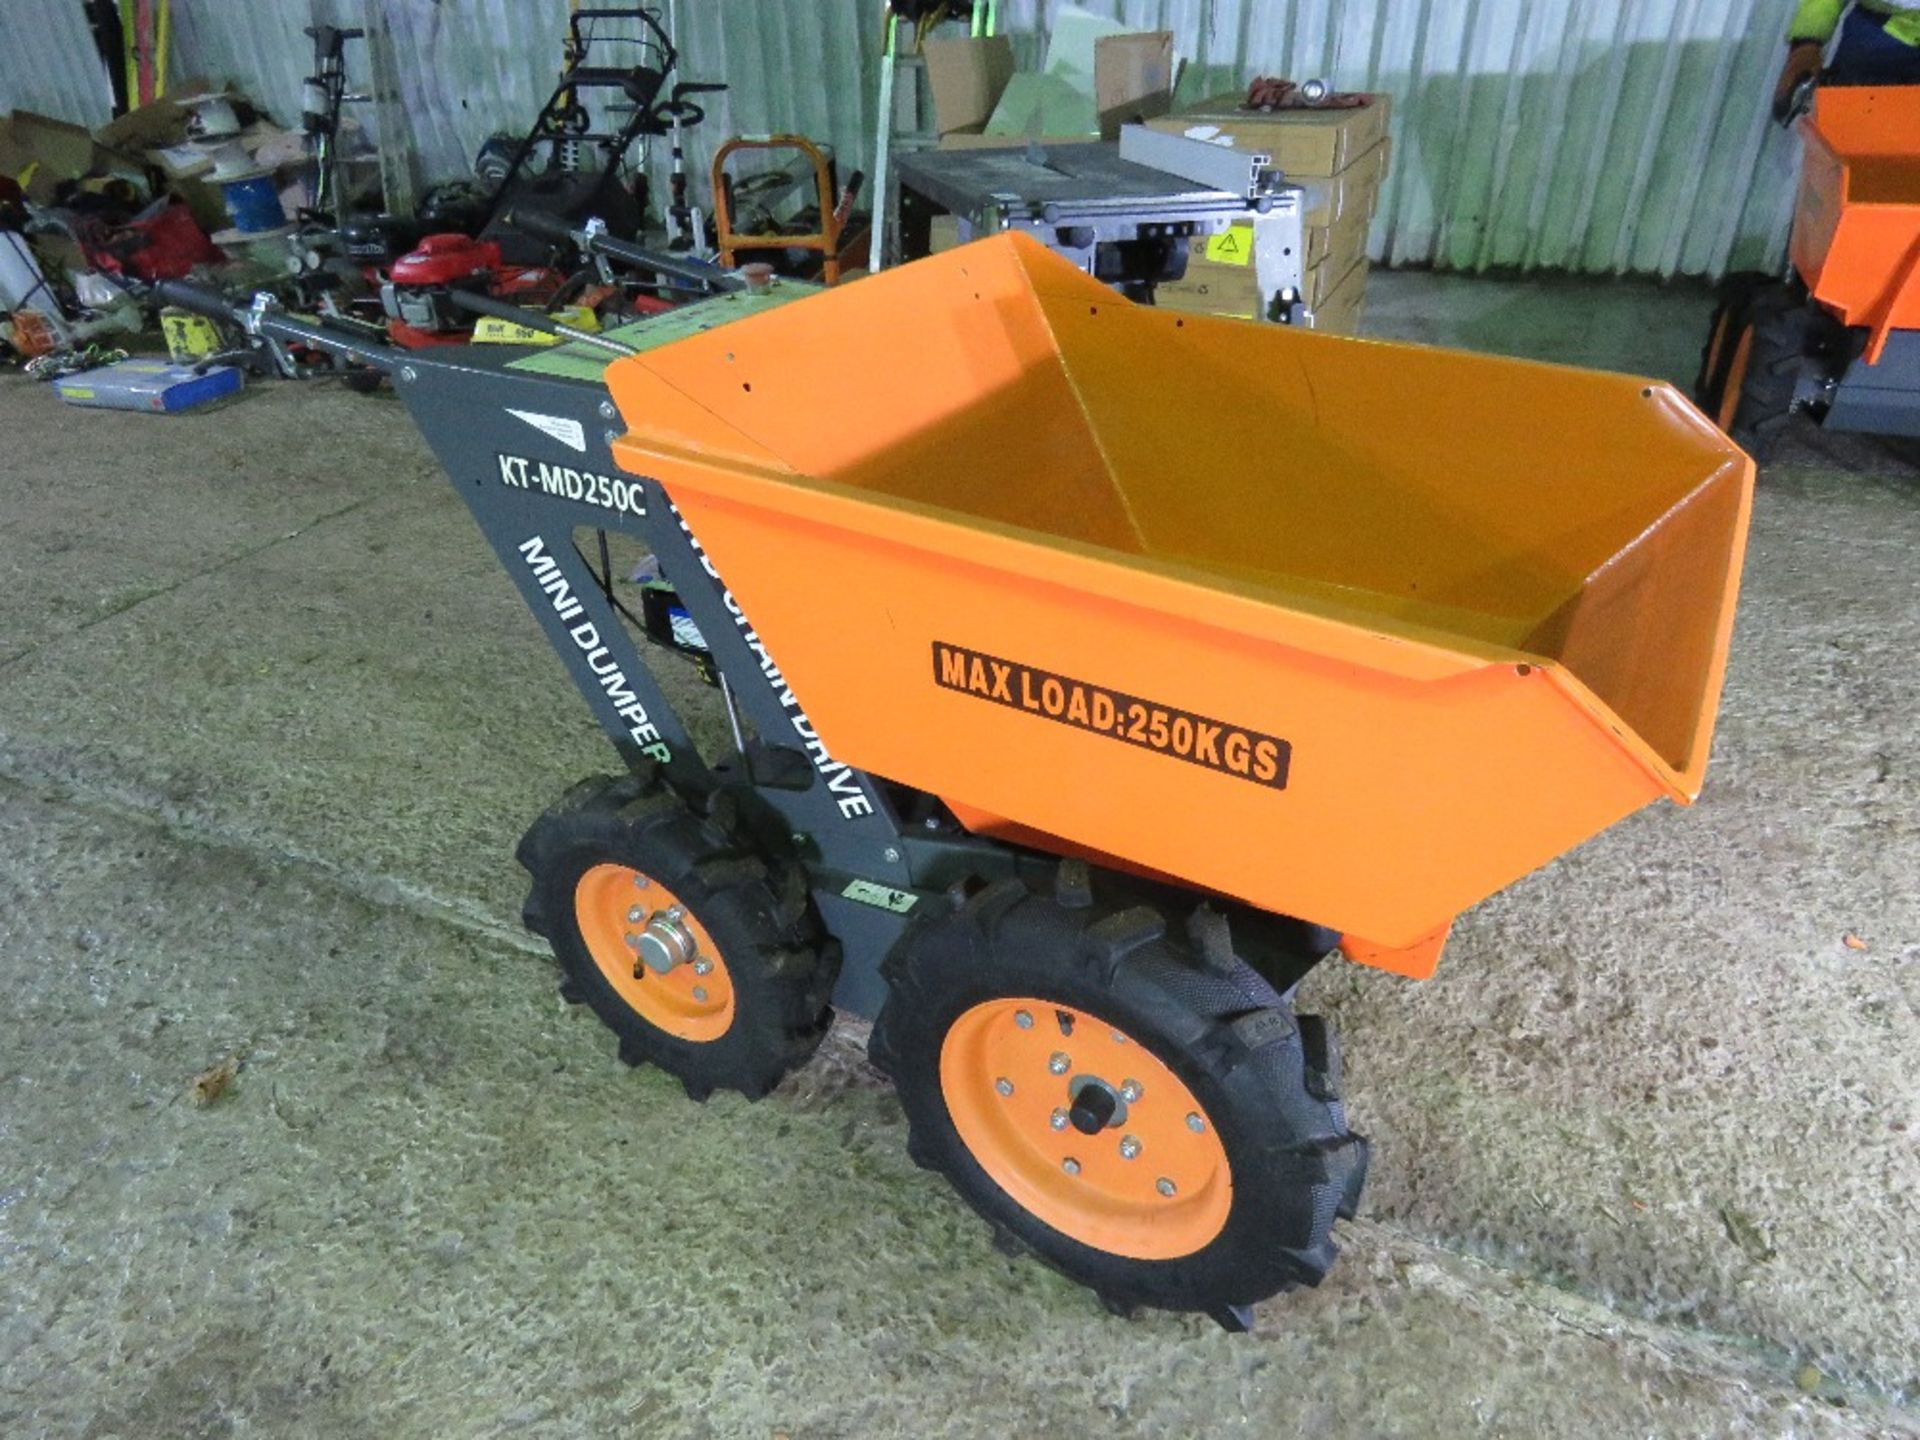 KTMD250C PETROL ENGINED 4WD CHAIN DRIVEN POWER BARROW, APPEARS UNUSED. - Image 4 of 13